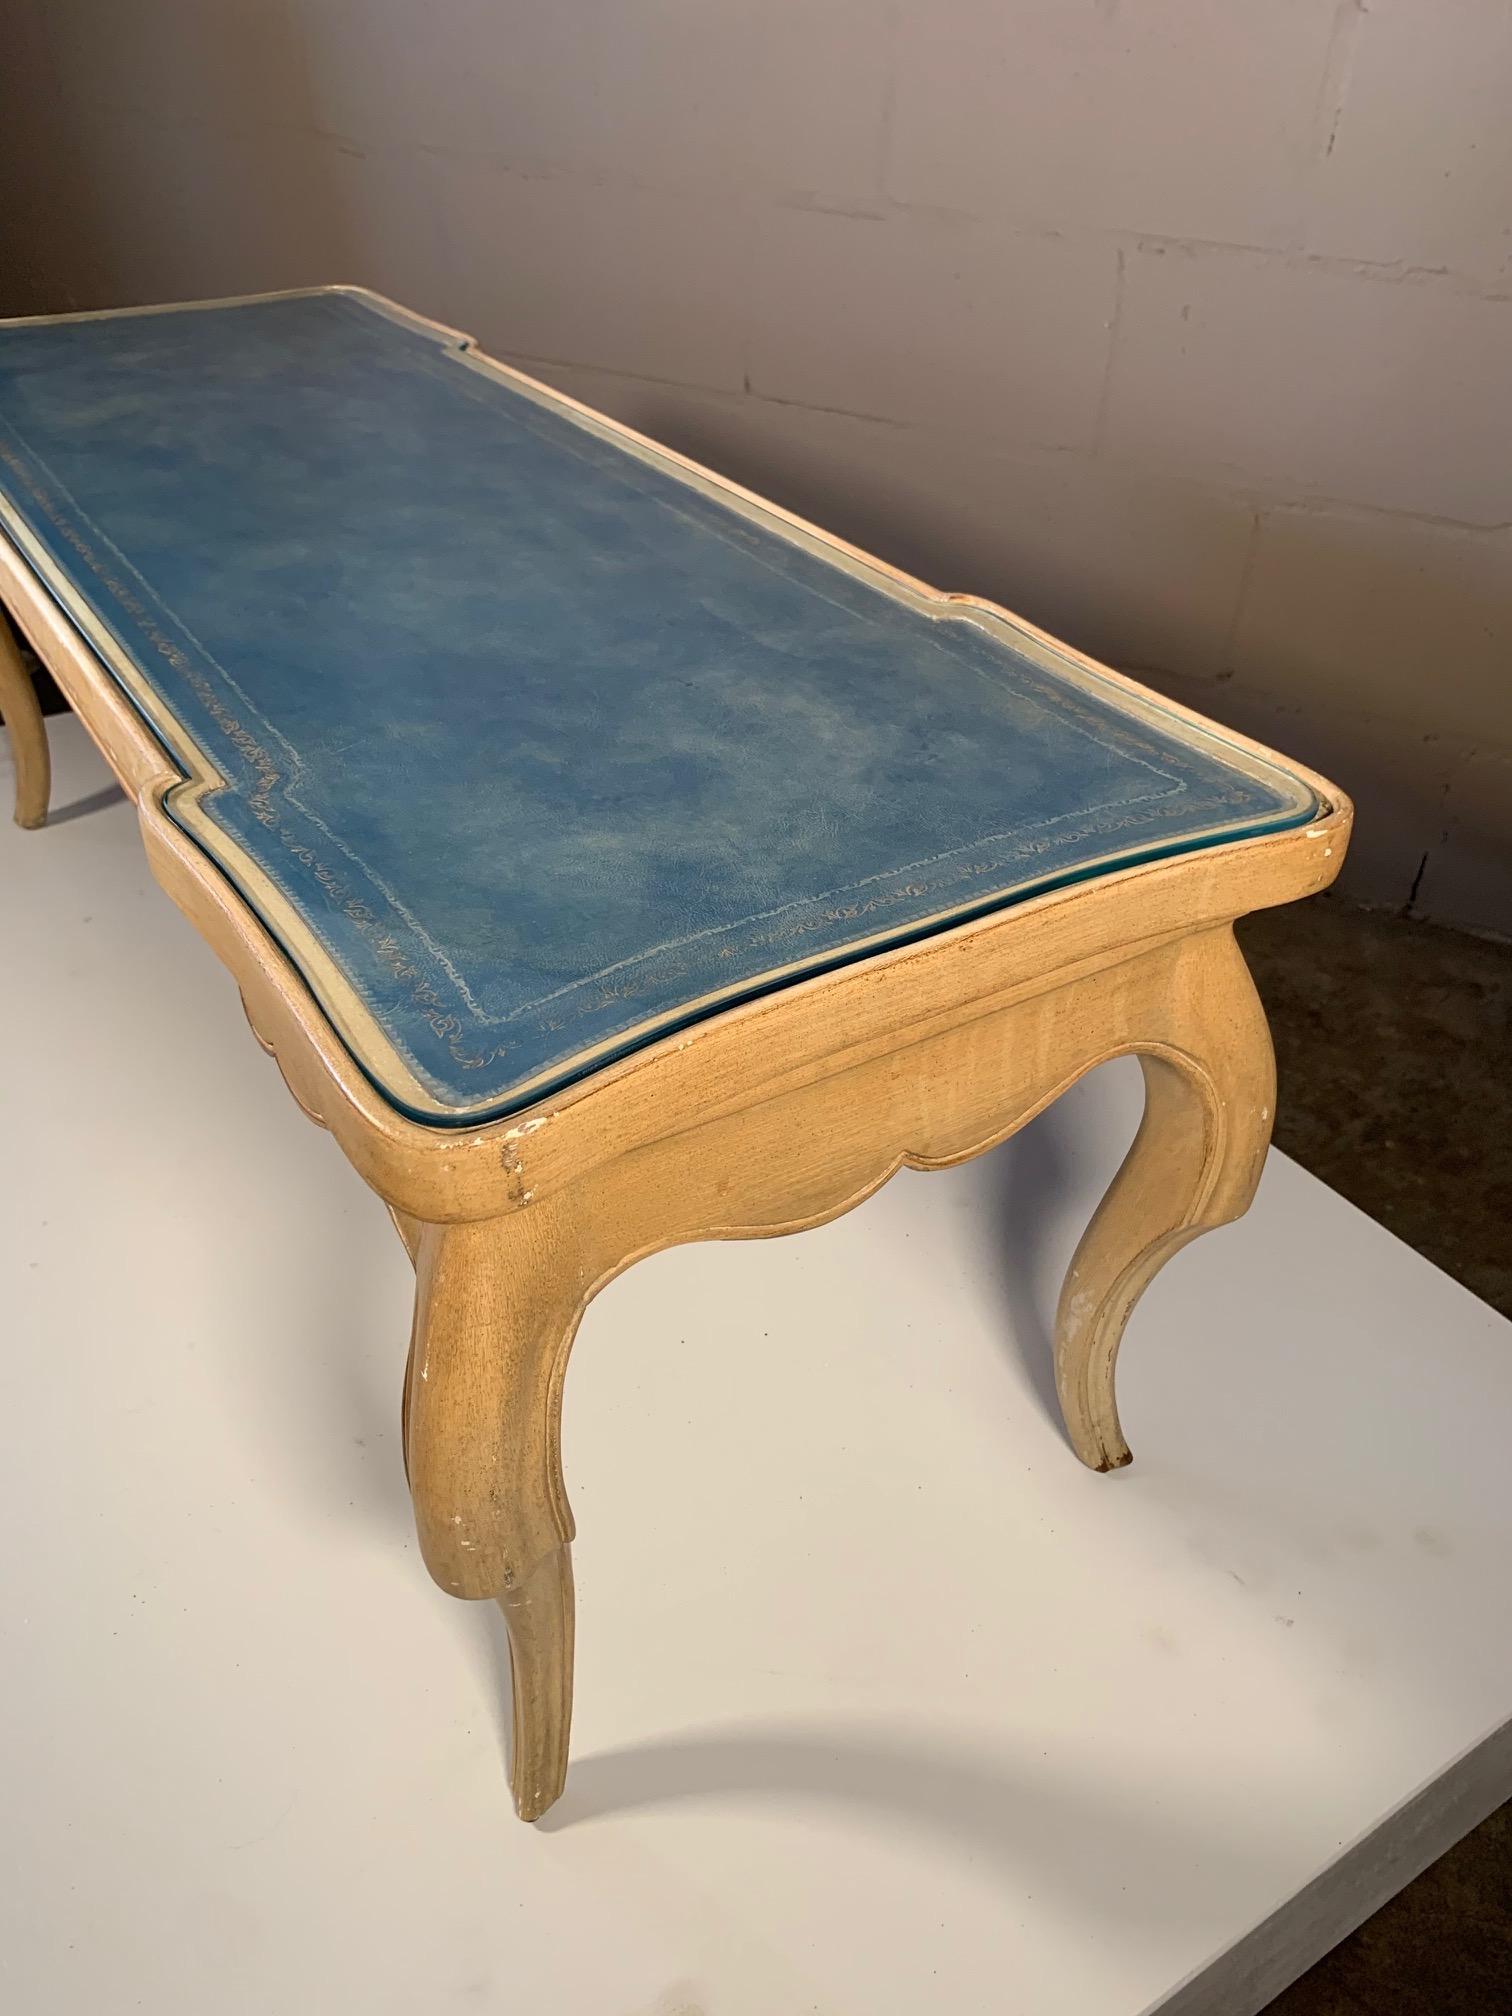 Charming French Provincial Coffee Table with Blue Leather Top 2